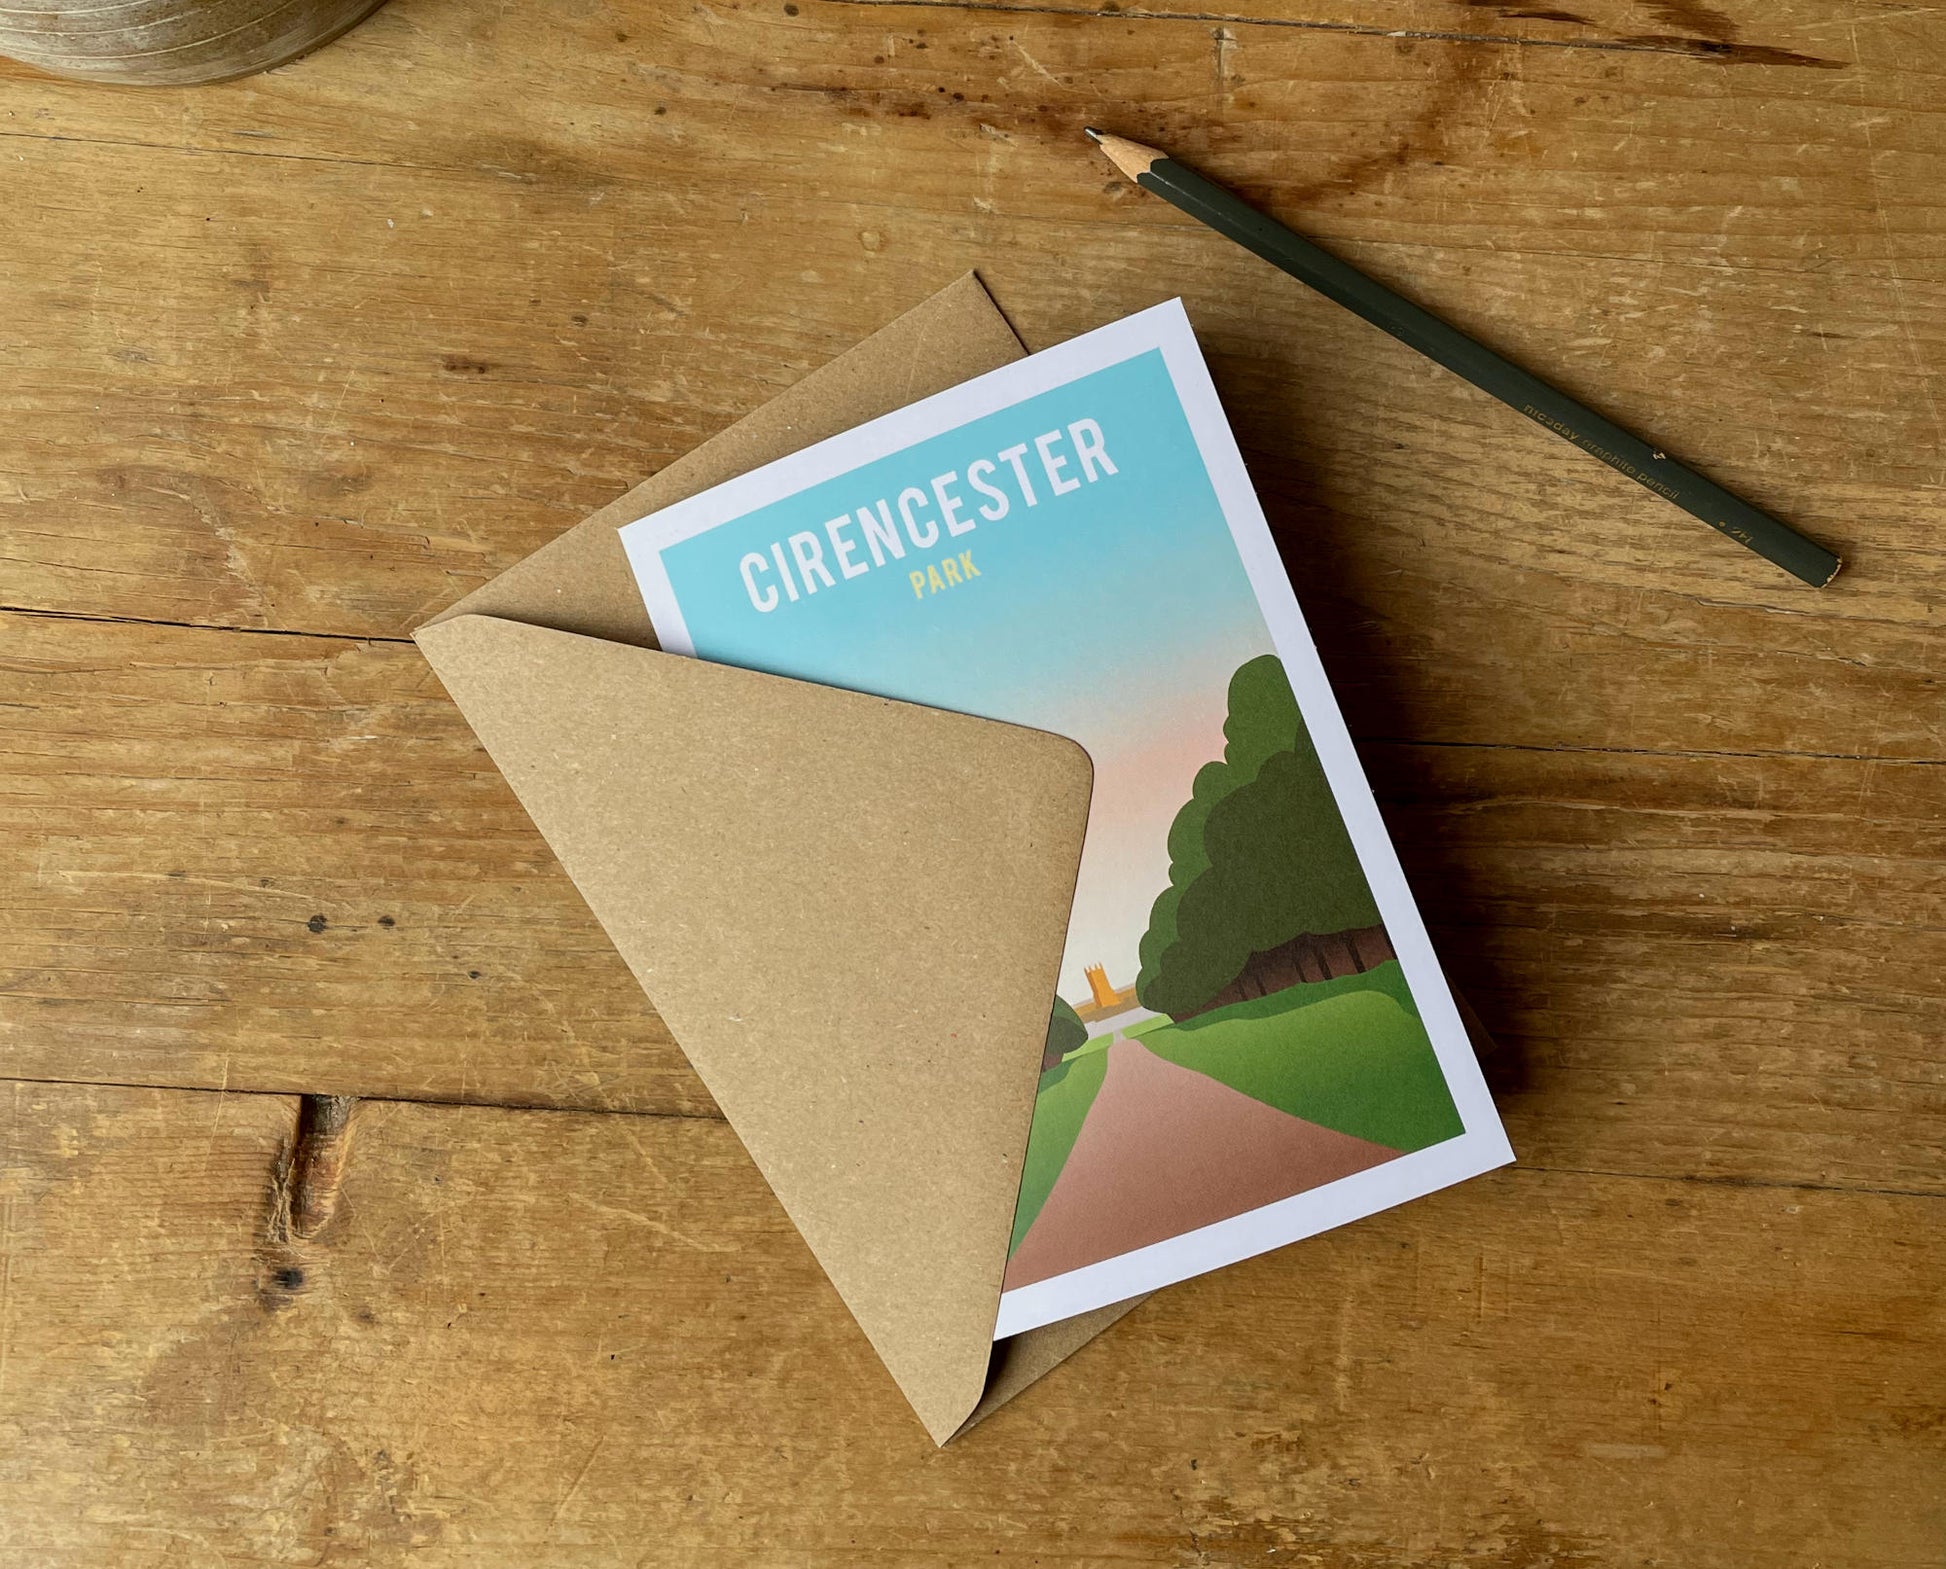 Cirencester Park Greeting Card on wooden desk